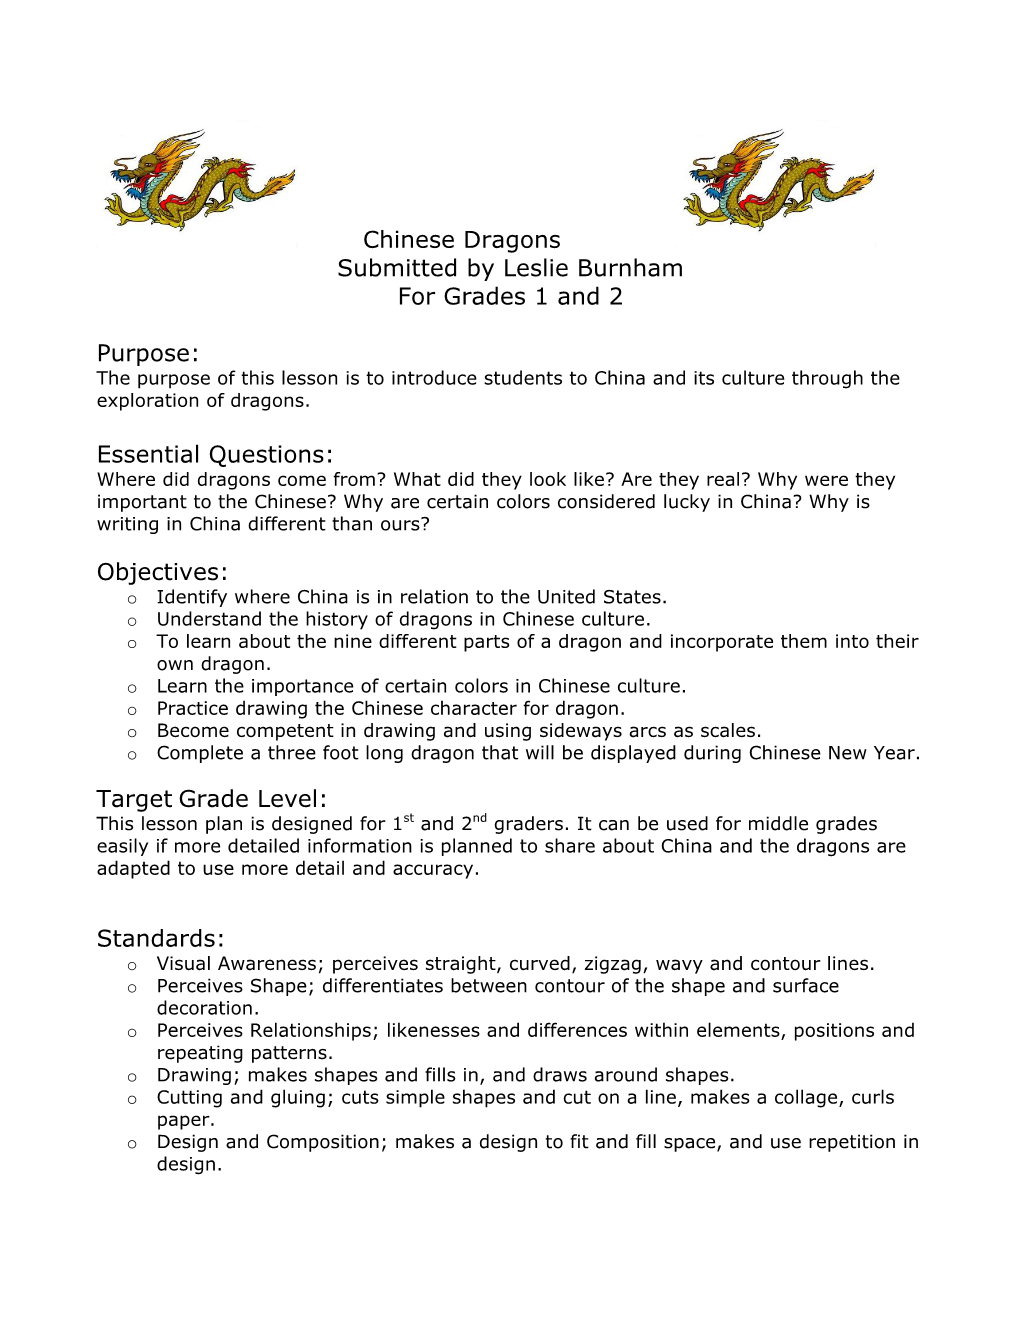 Chinese Dragons Submitted by Leslie Burnham for Grades 1 and 2 Purpose